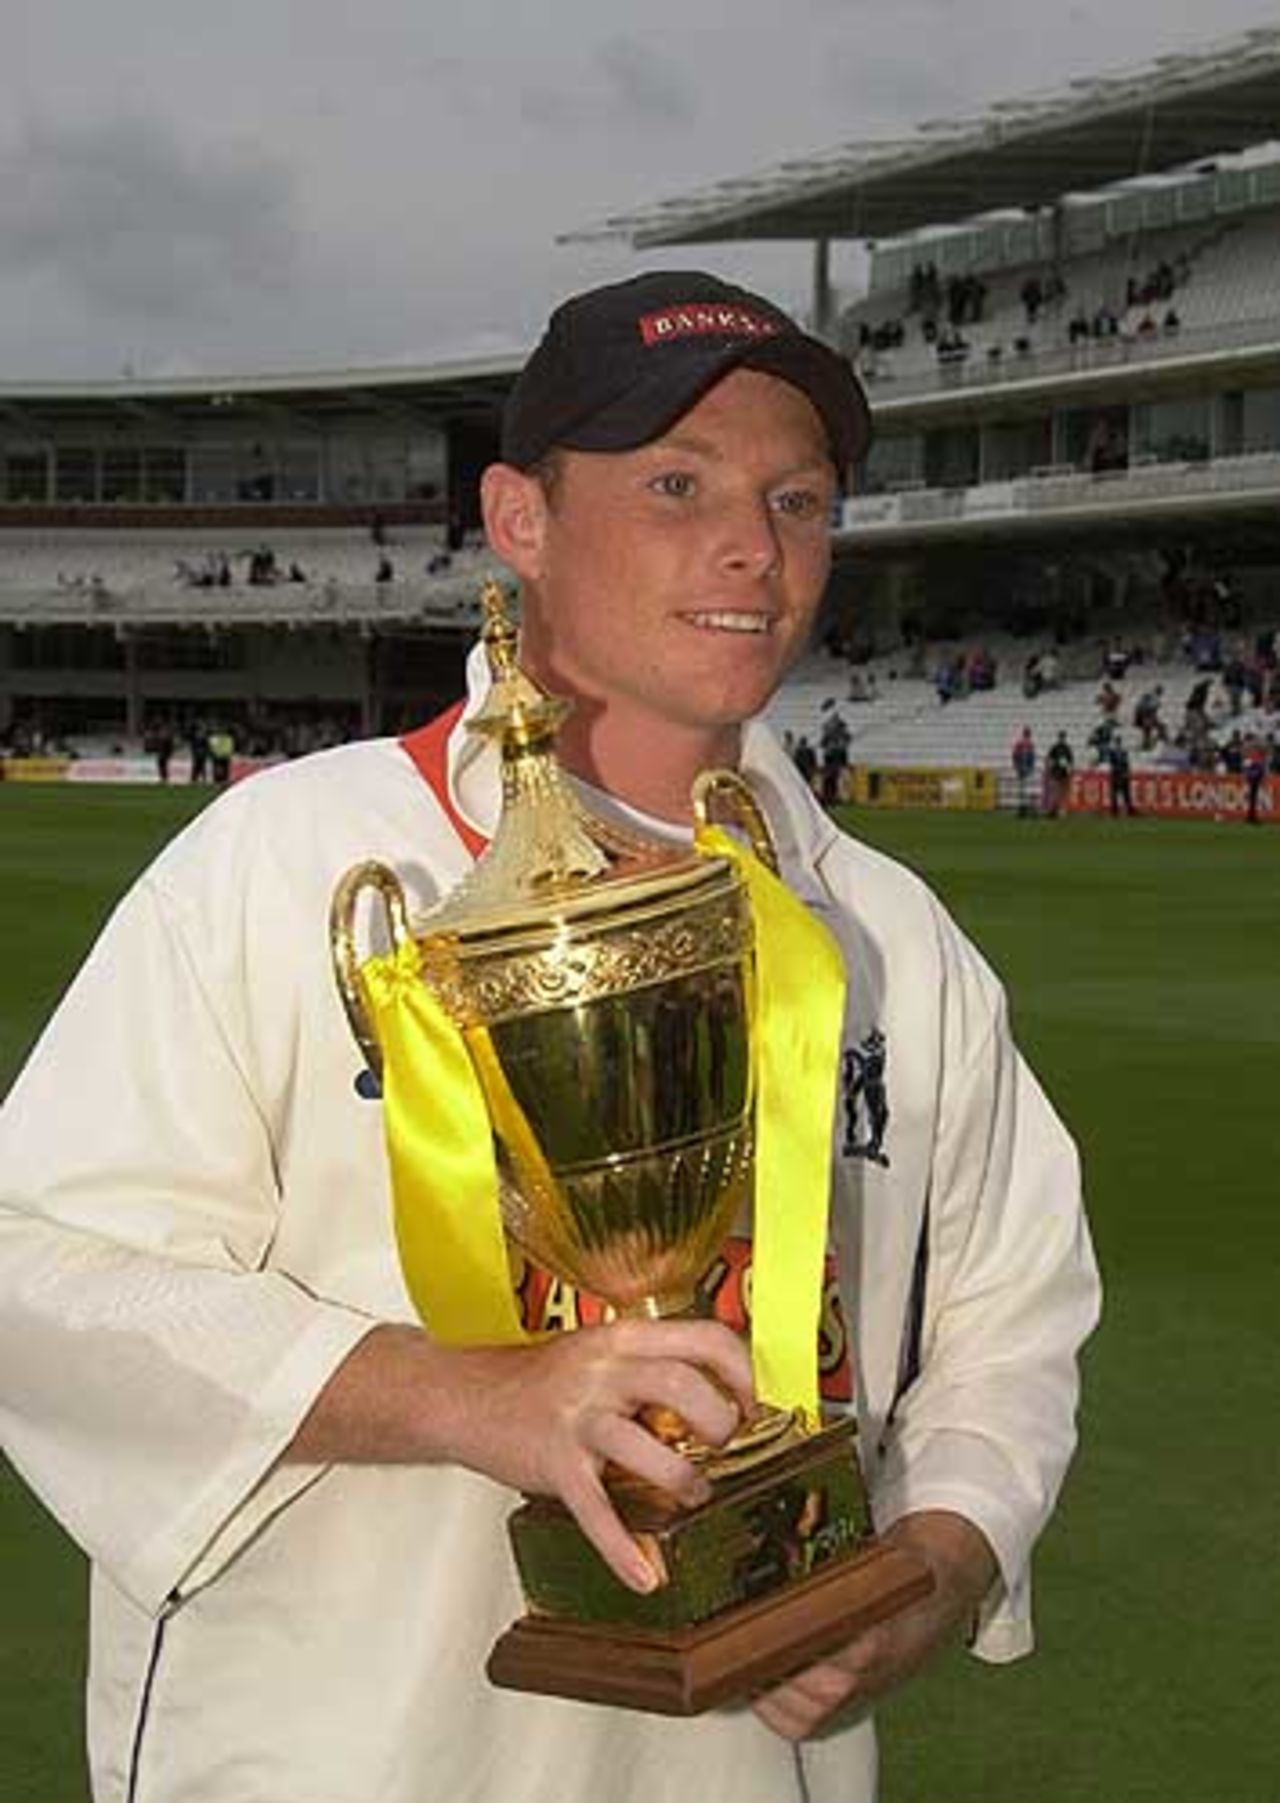 Man of the Match Ian Bell with the Benson and Hedges Cup, Final, Essex v Warwickshire, Lord's, 22 June 2002